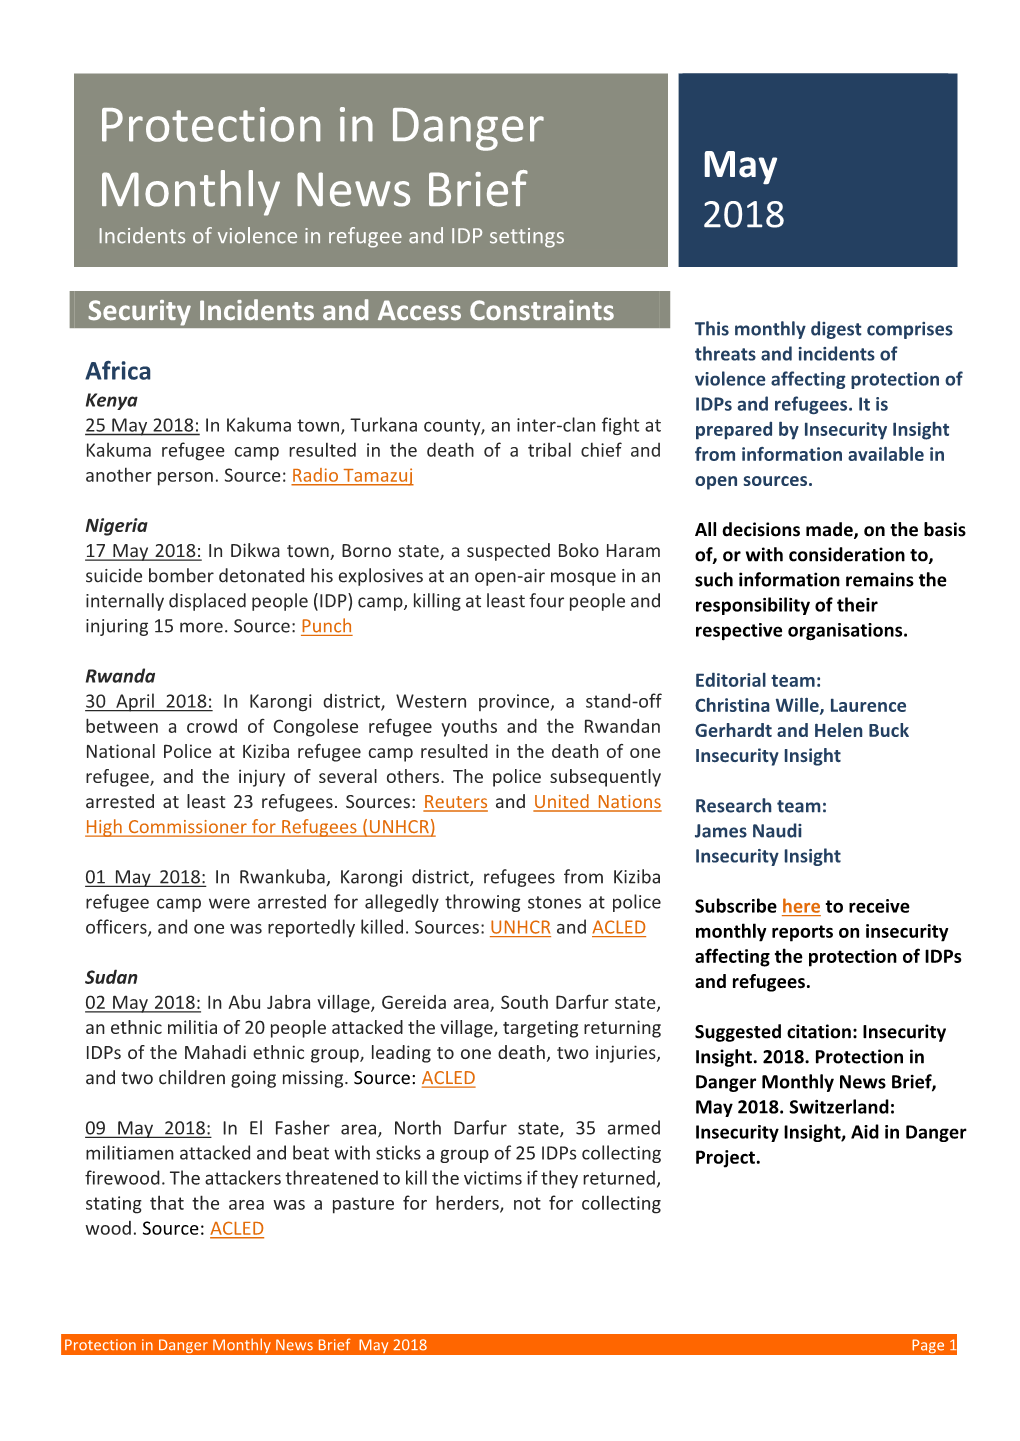 Protection in Danger Monthly News Brief May 2018 Incidents of Violence in Refugee and IDP Settings